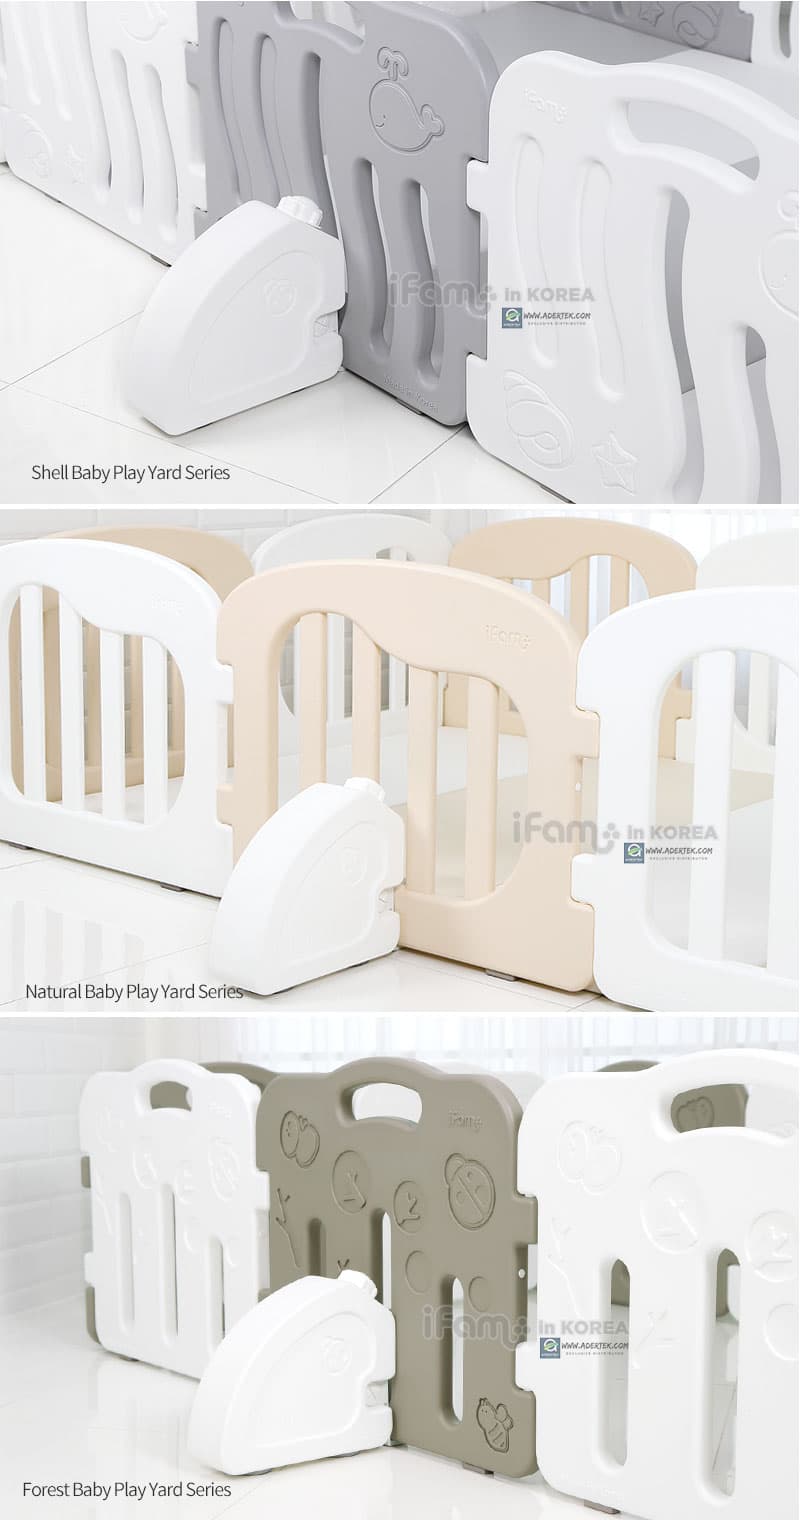 Use it together with any IFAM baby play yards easily